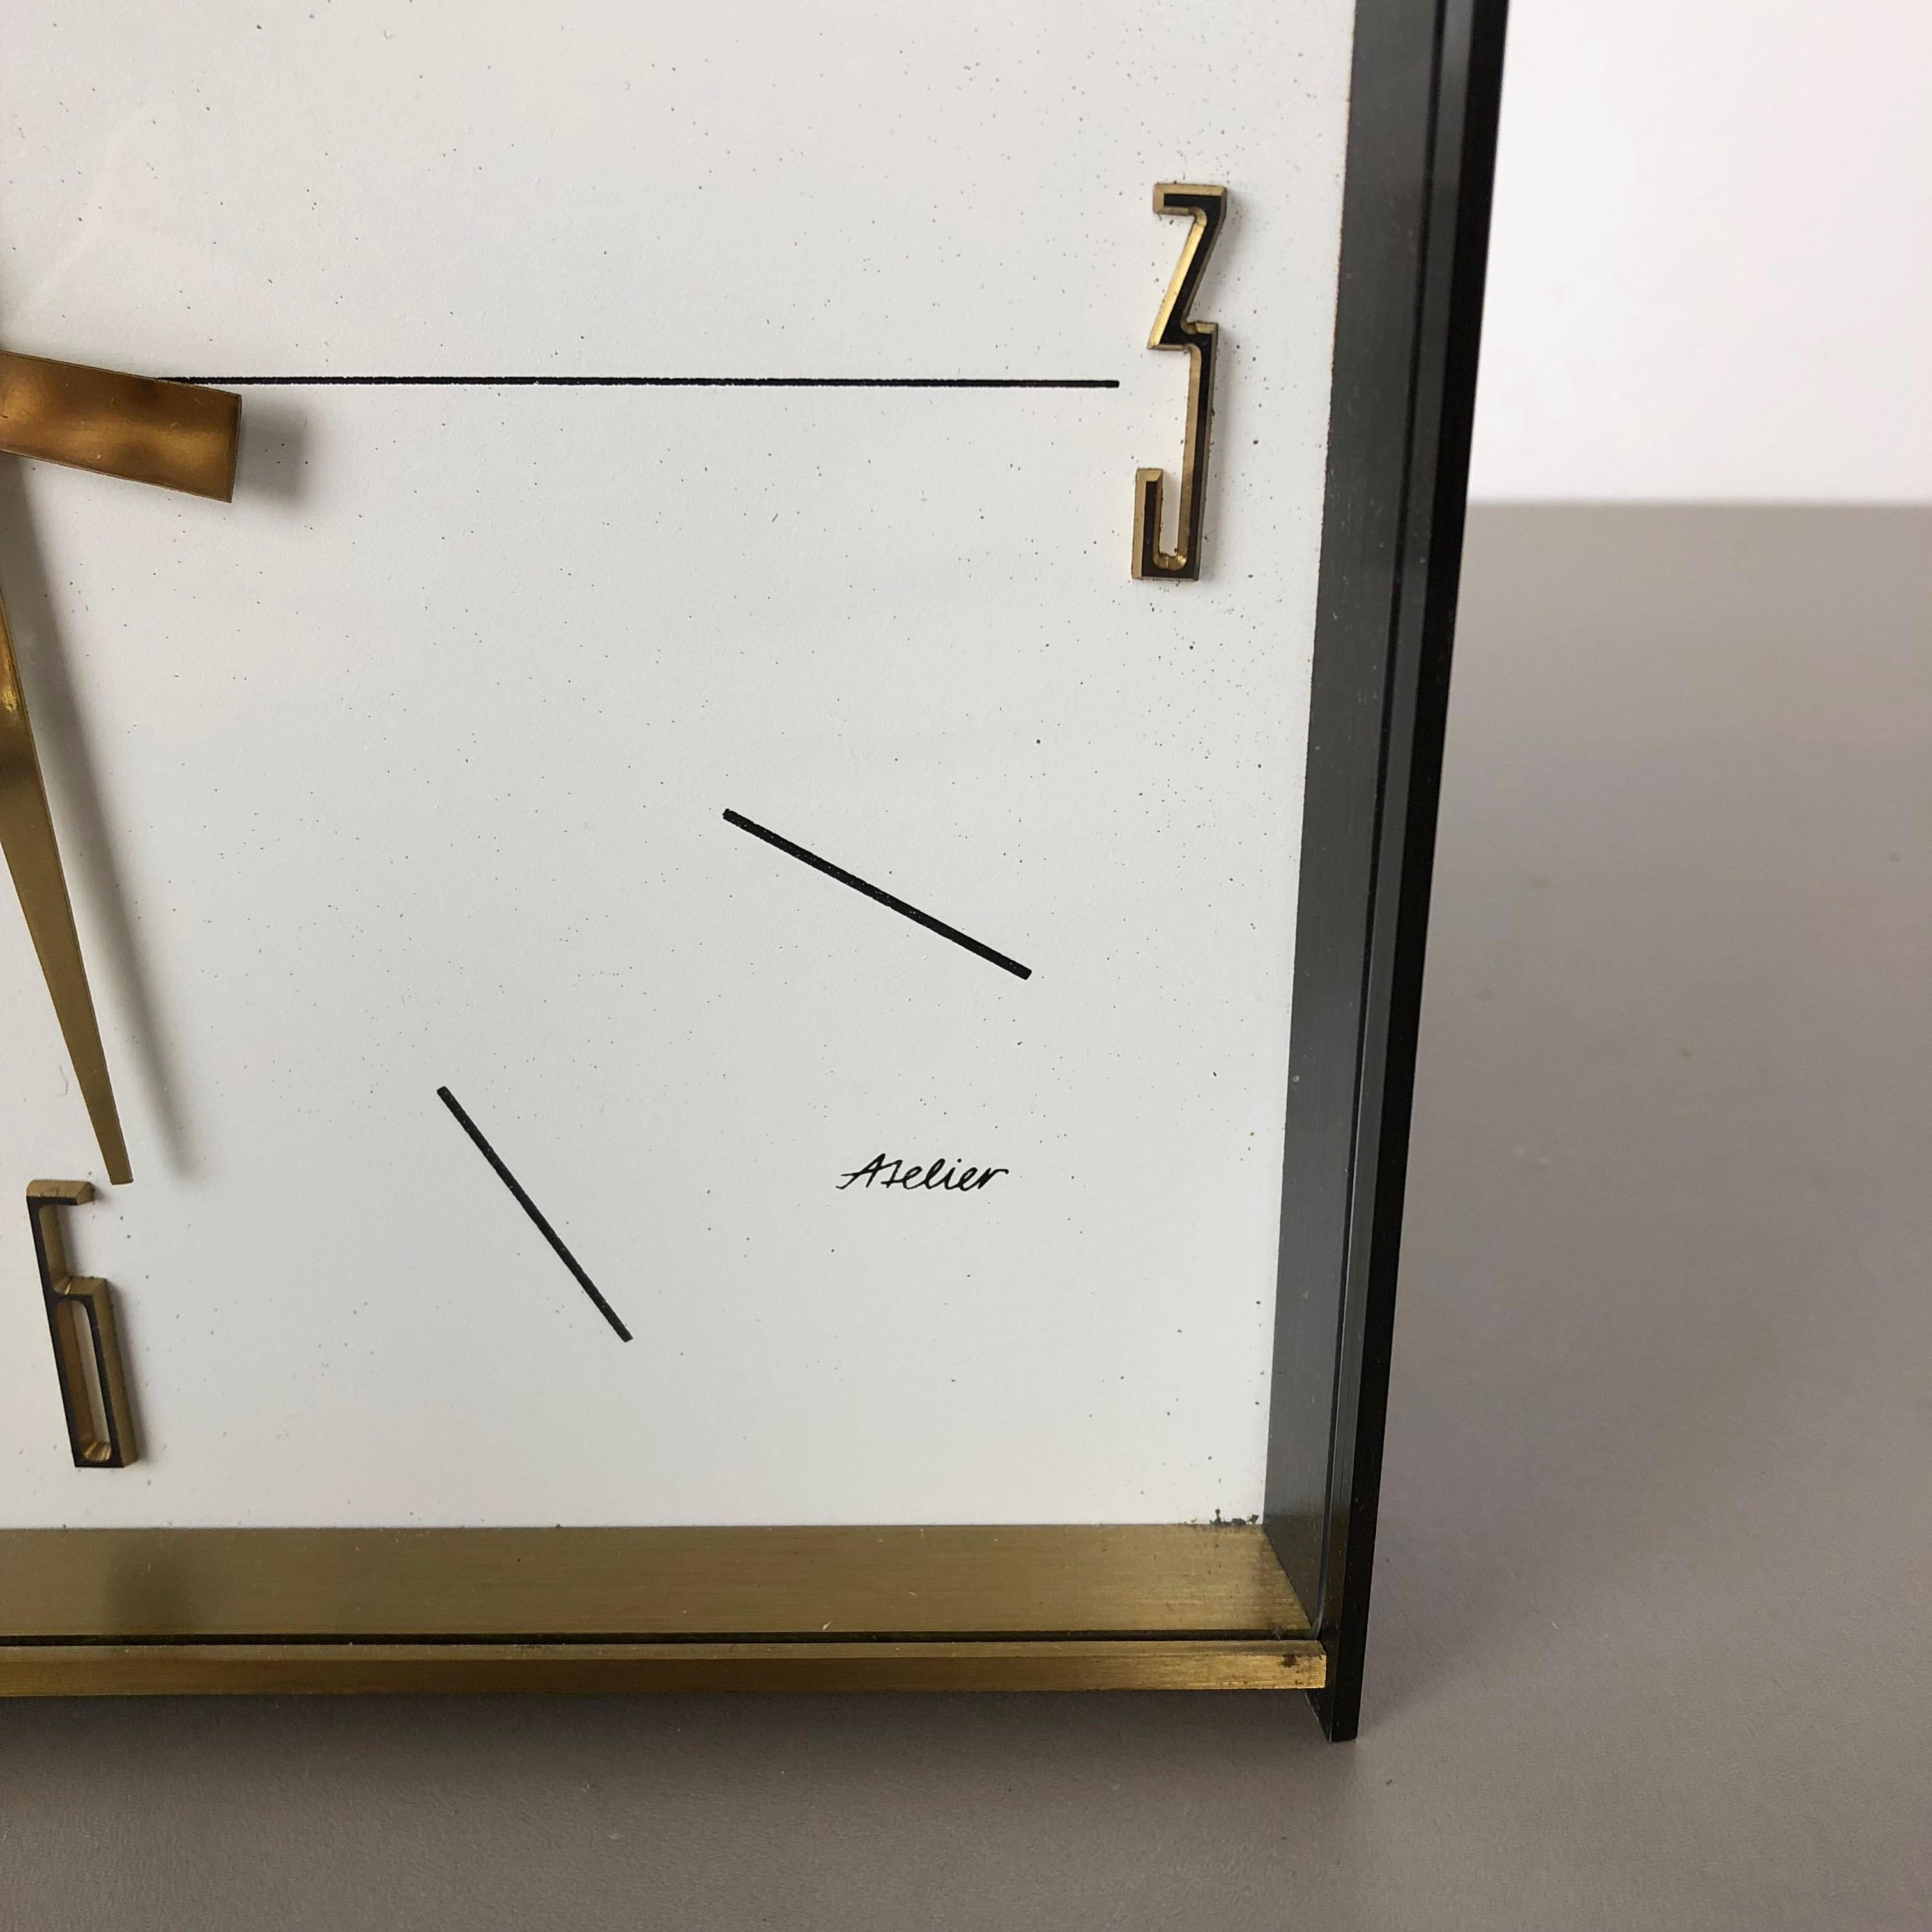 Vintage 1960s Hollywood Regency Brass Wall Table Clock Dugena Electric, Germany 1